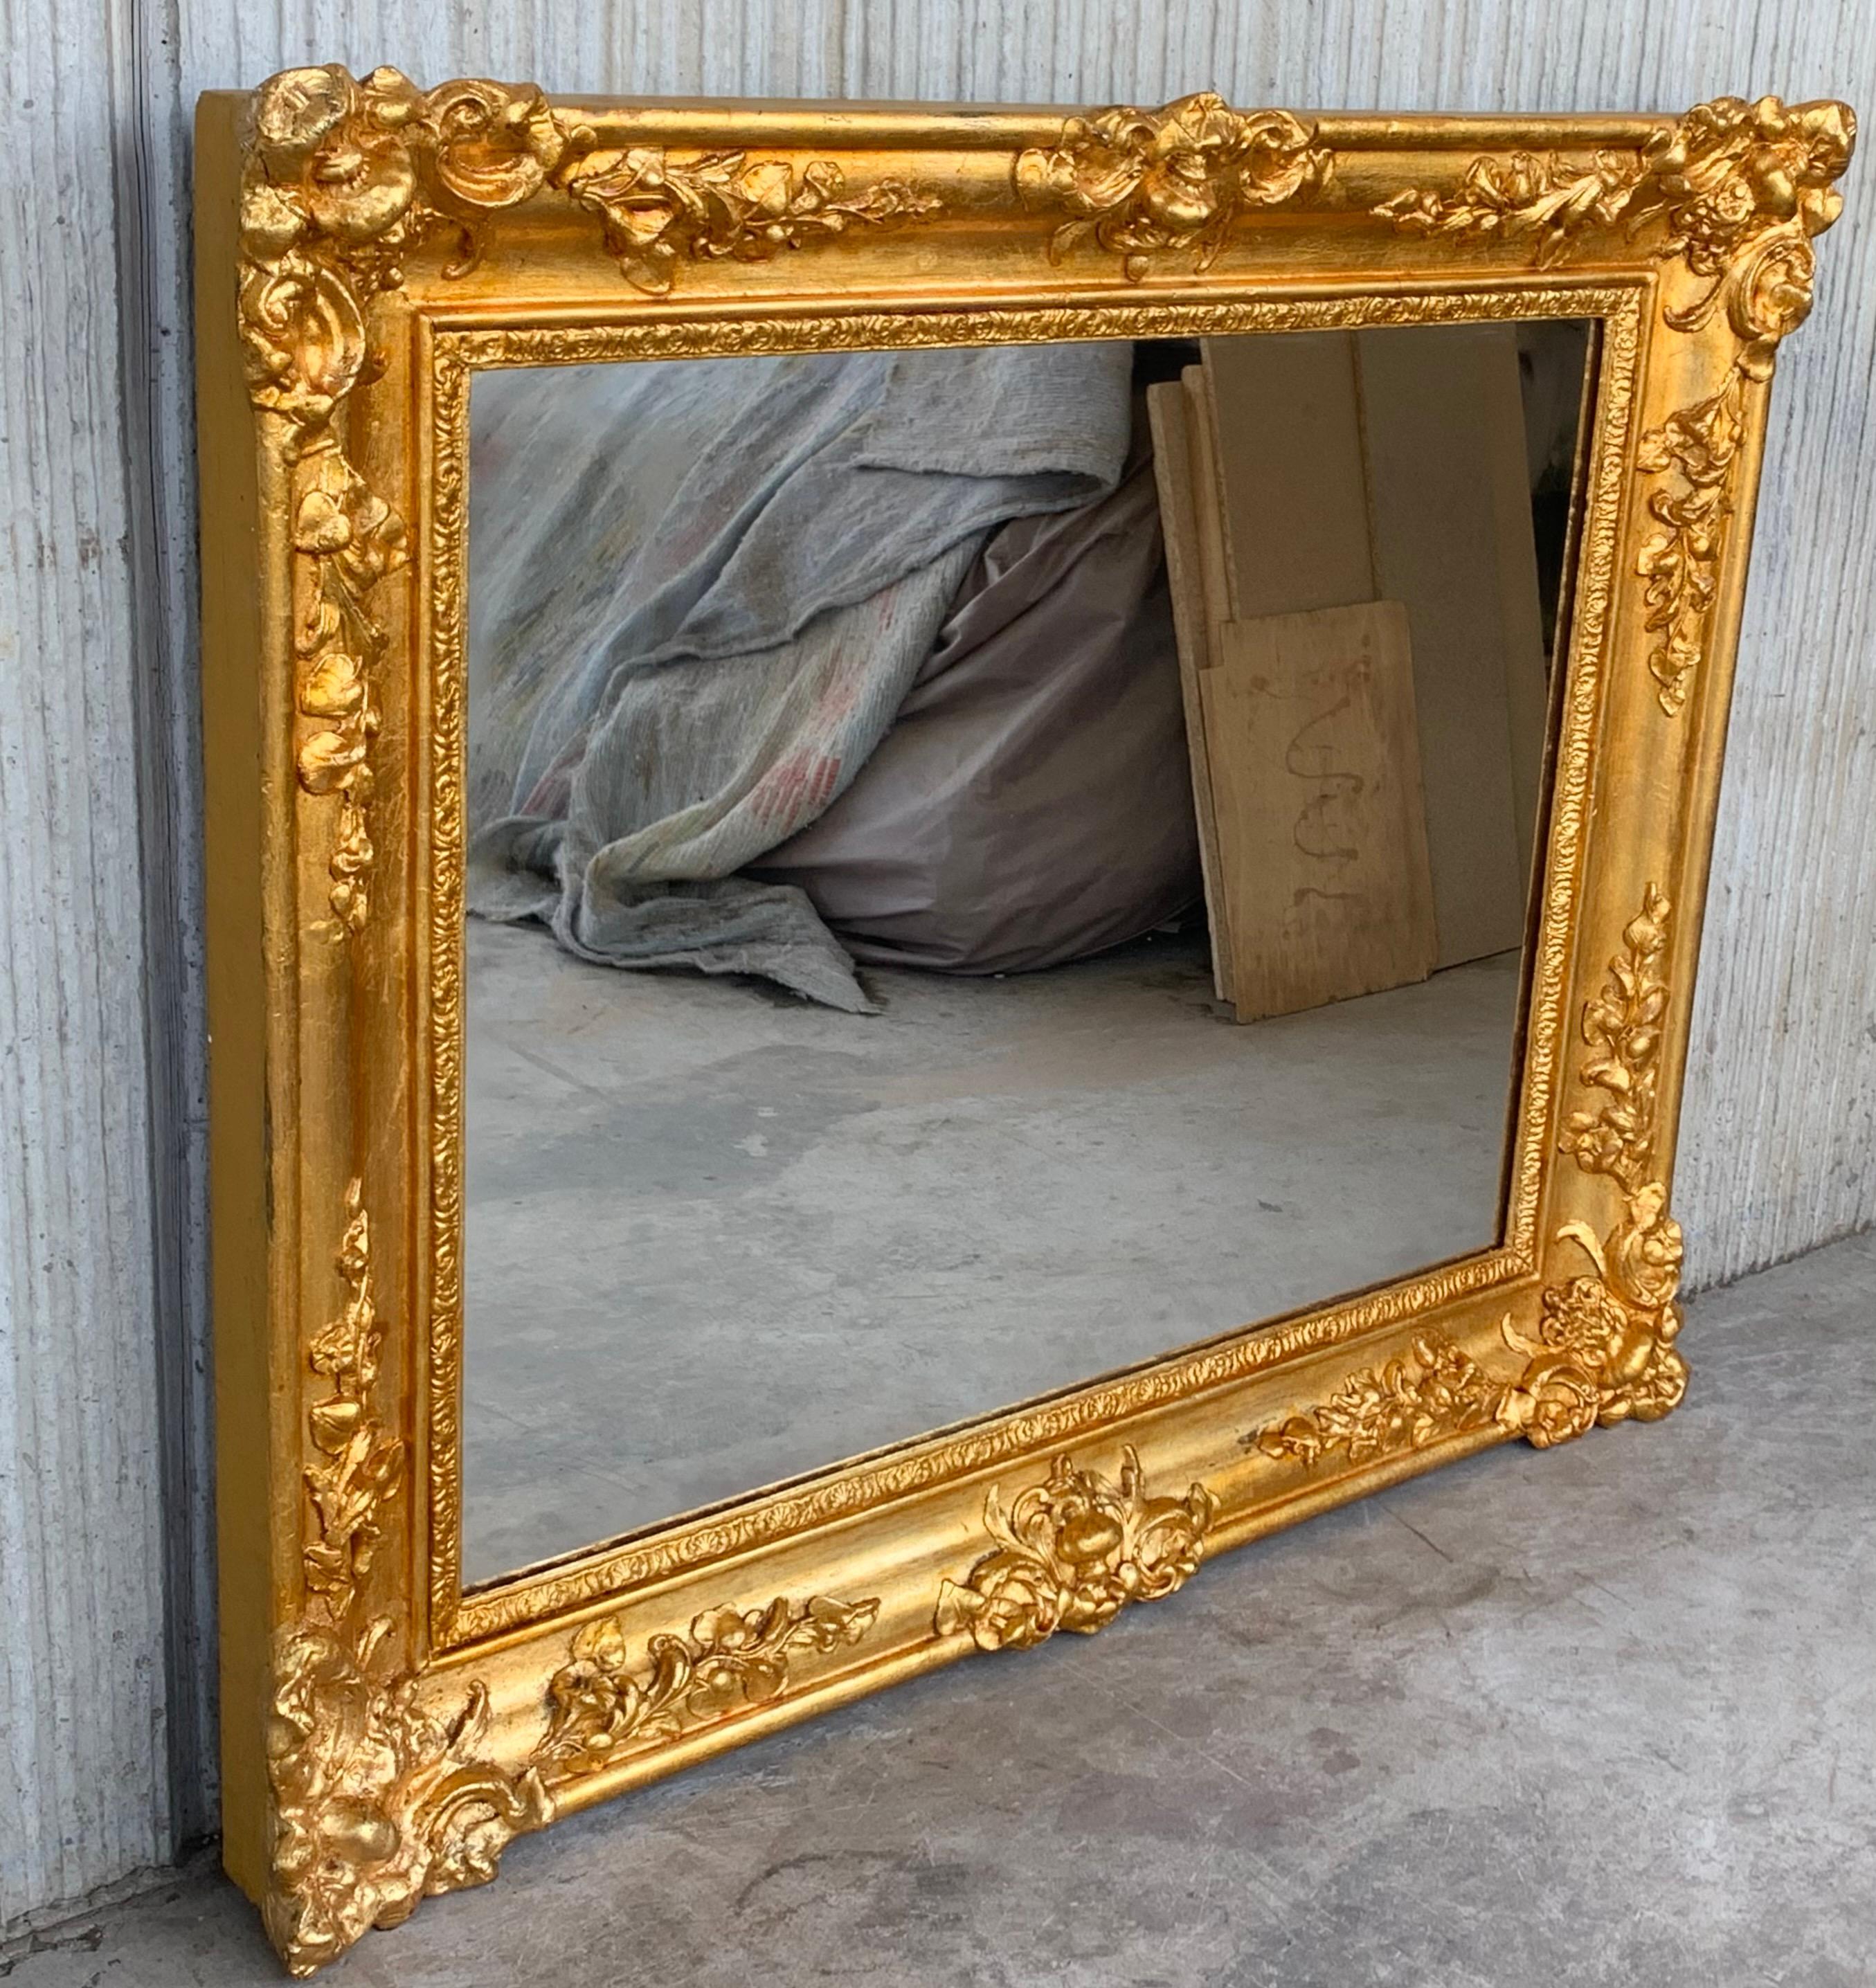 Regency 19th French Empire Period Carved Gilt Wood Rectangular Mirror